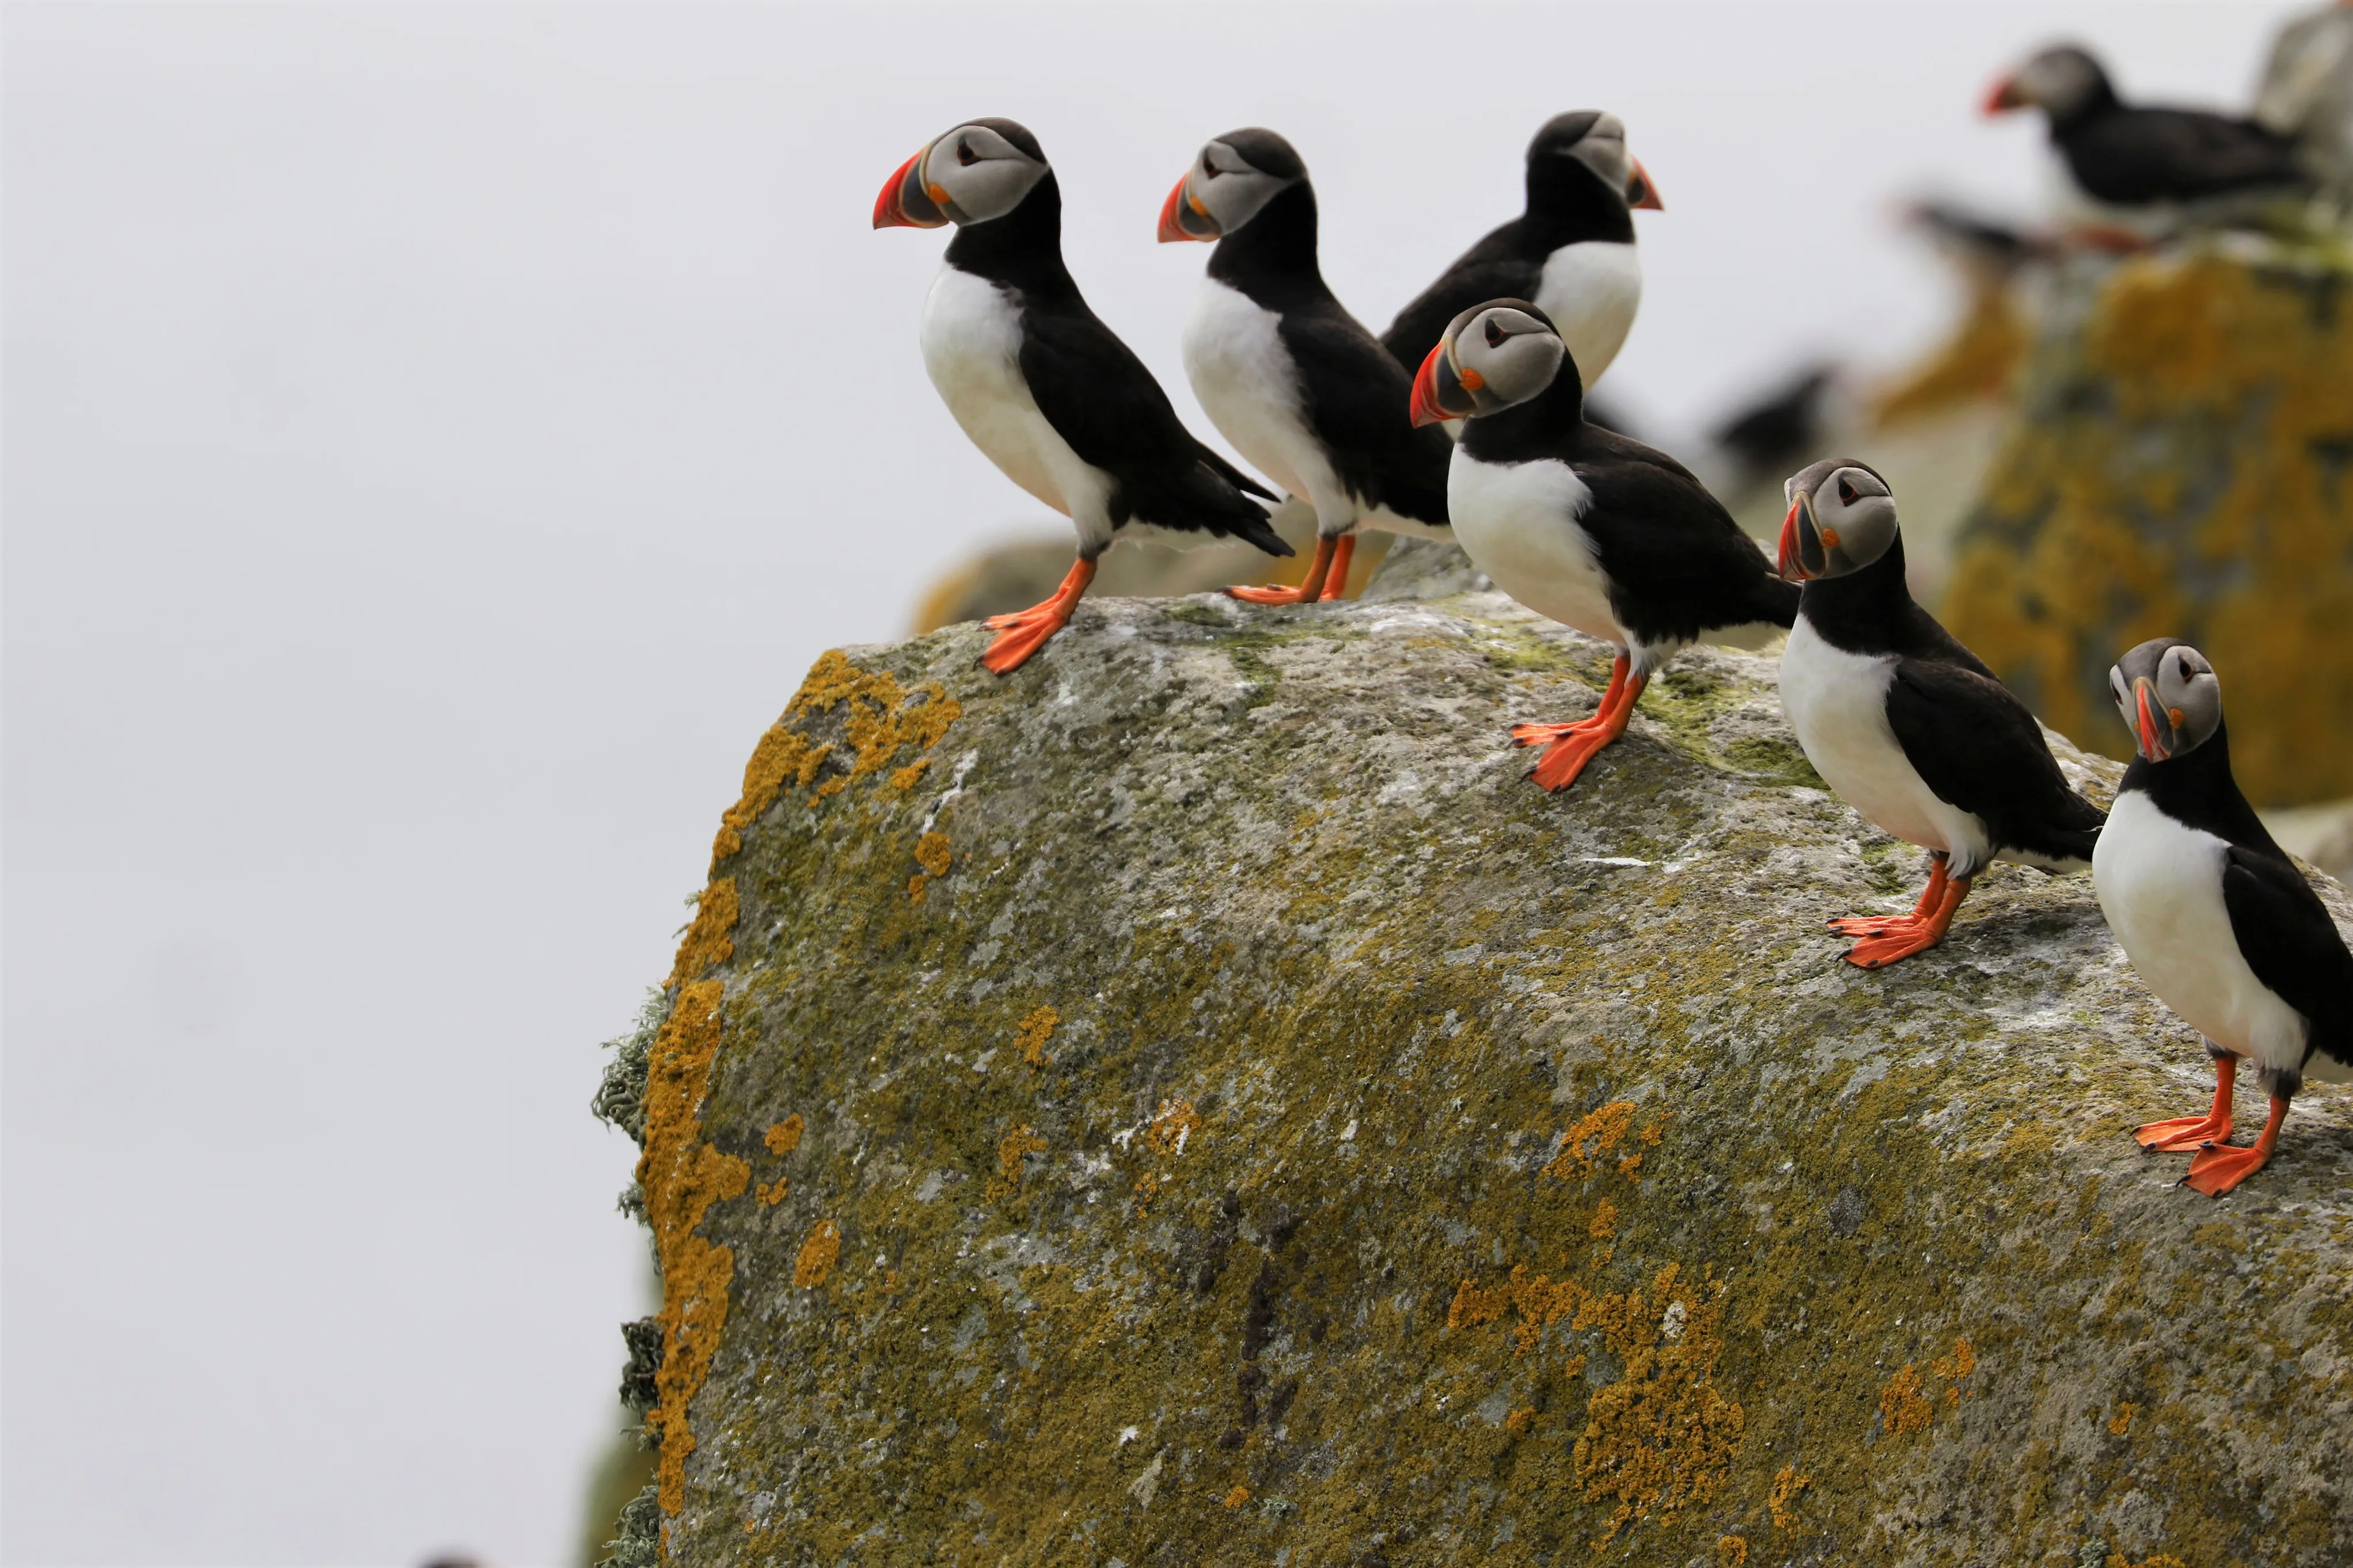 Puffins on the cliffside.